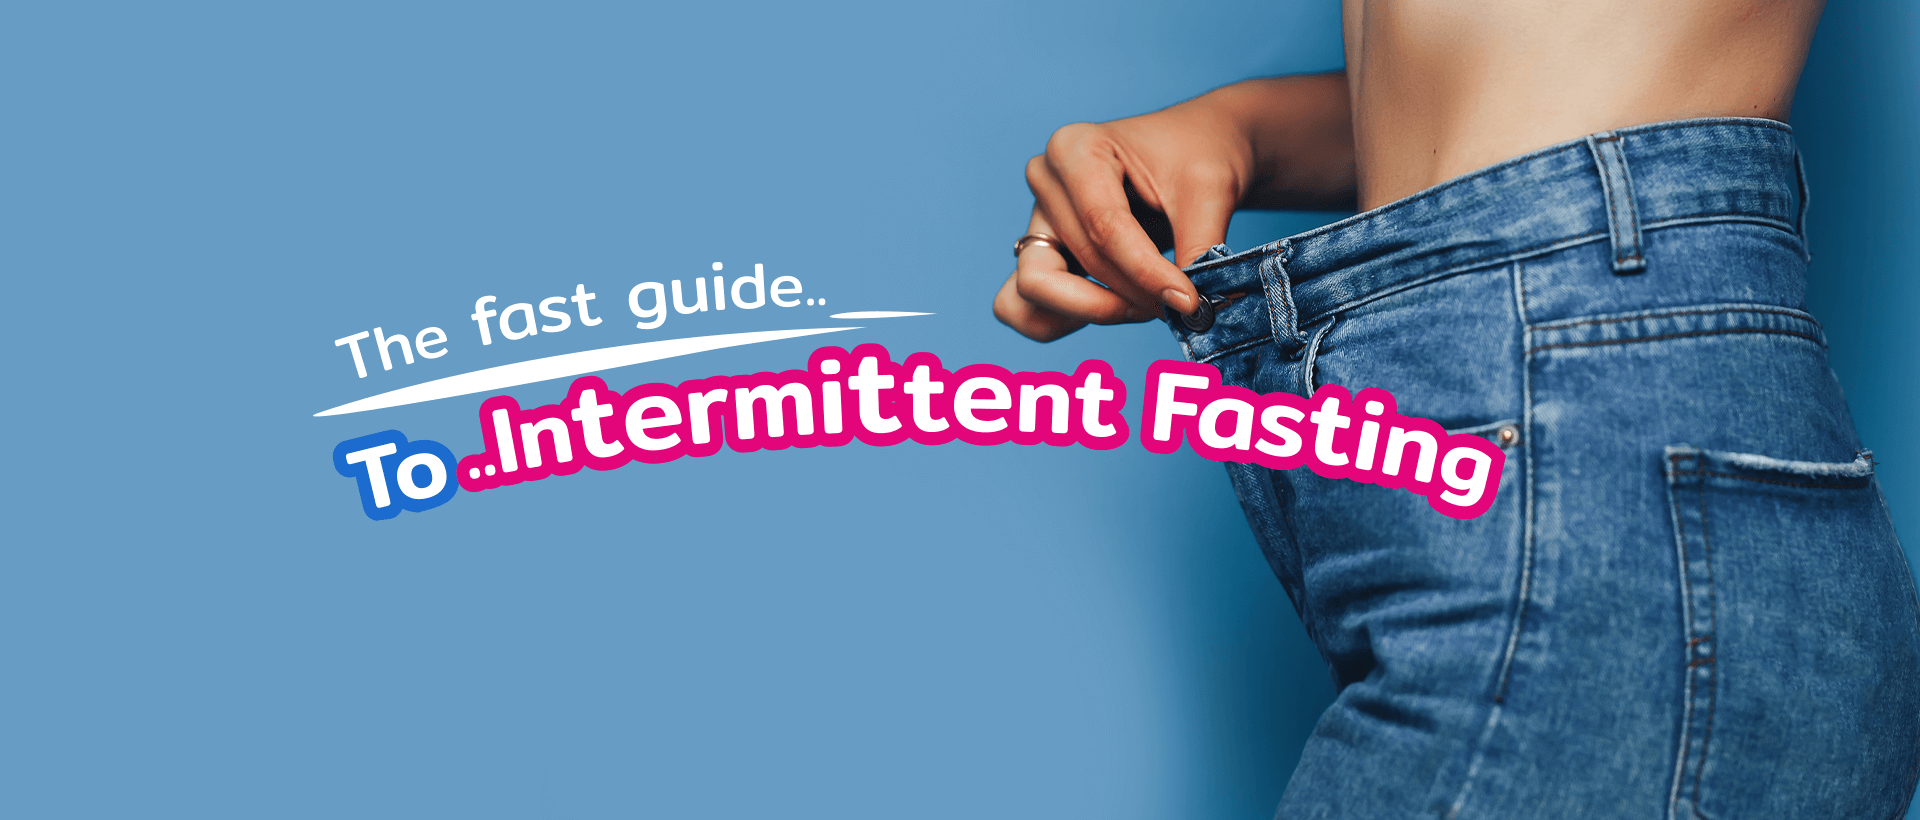 The fast guide to intermittent fasting